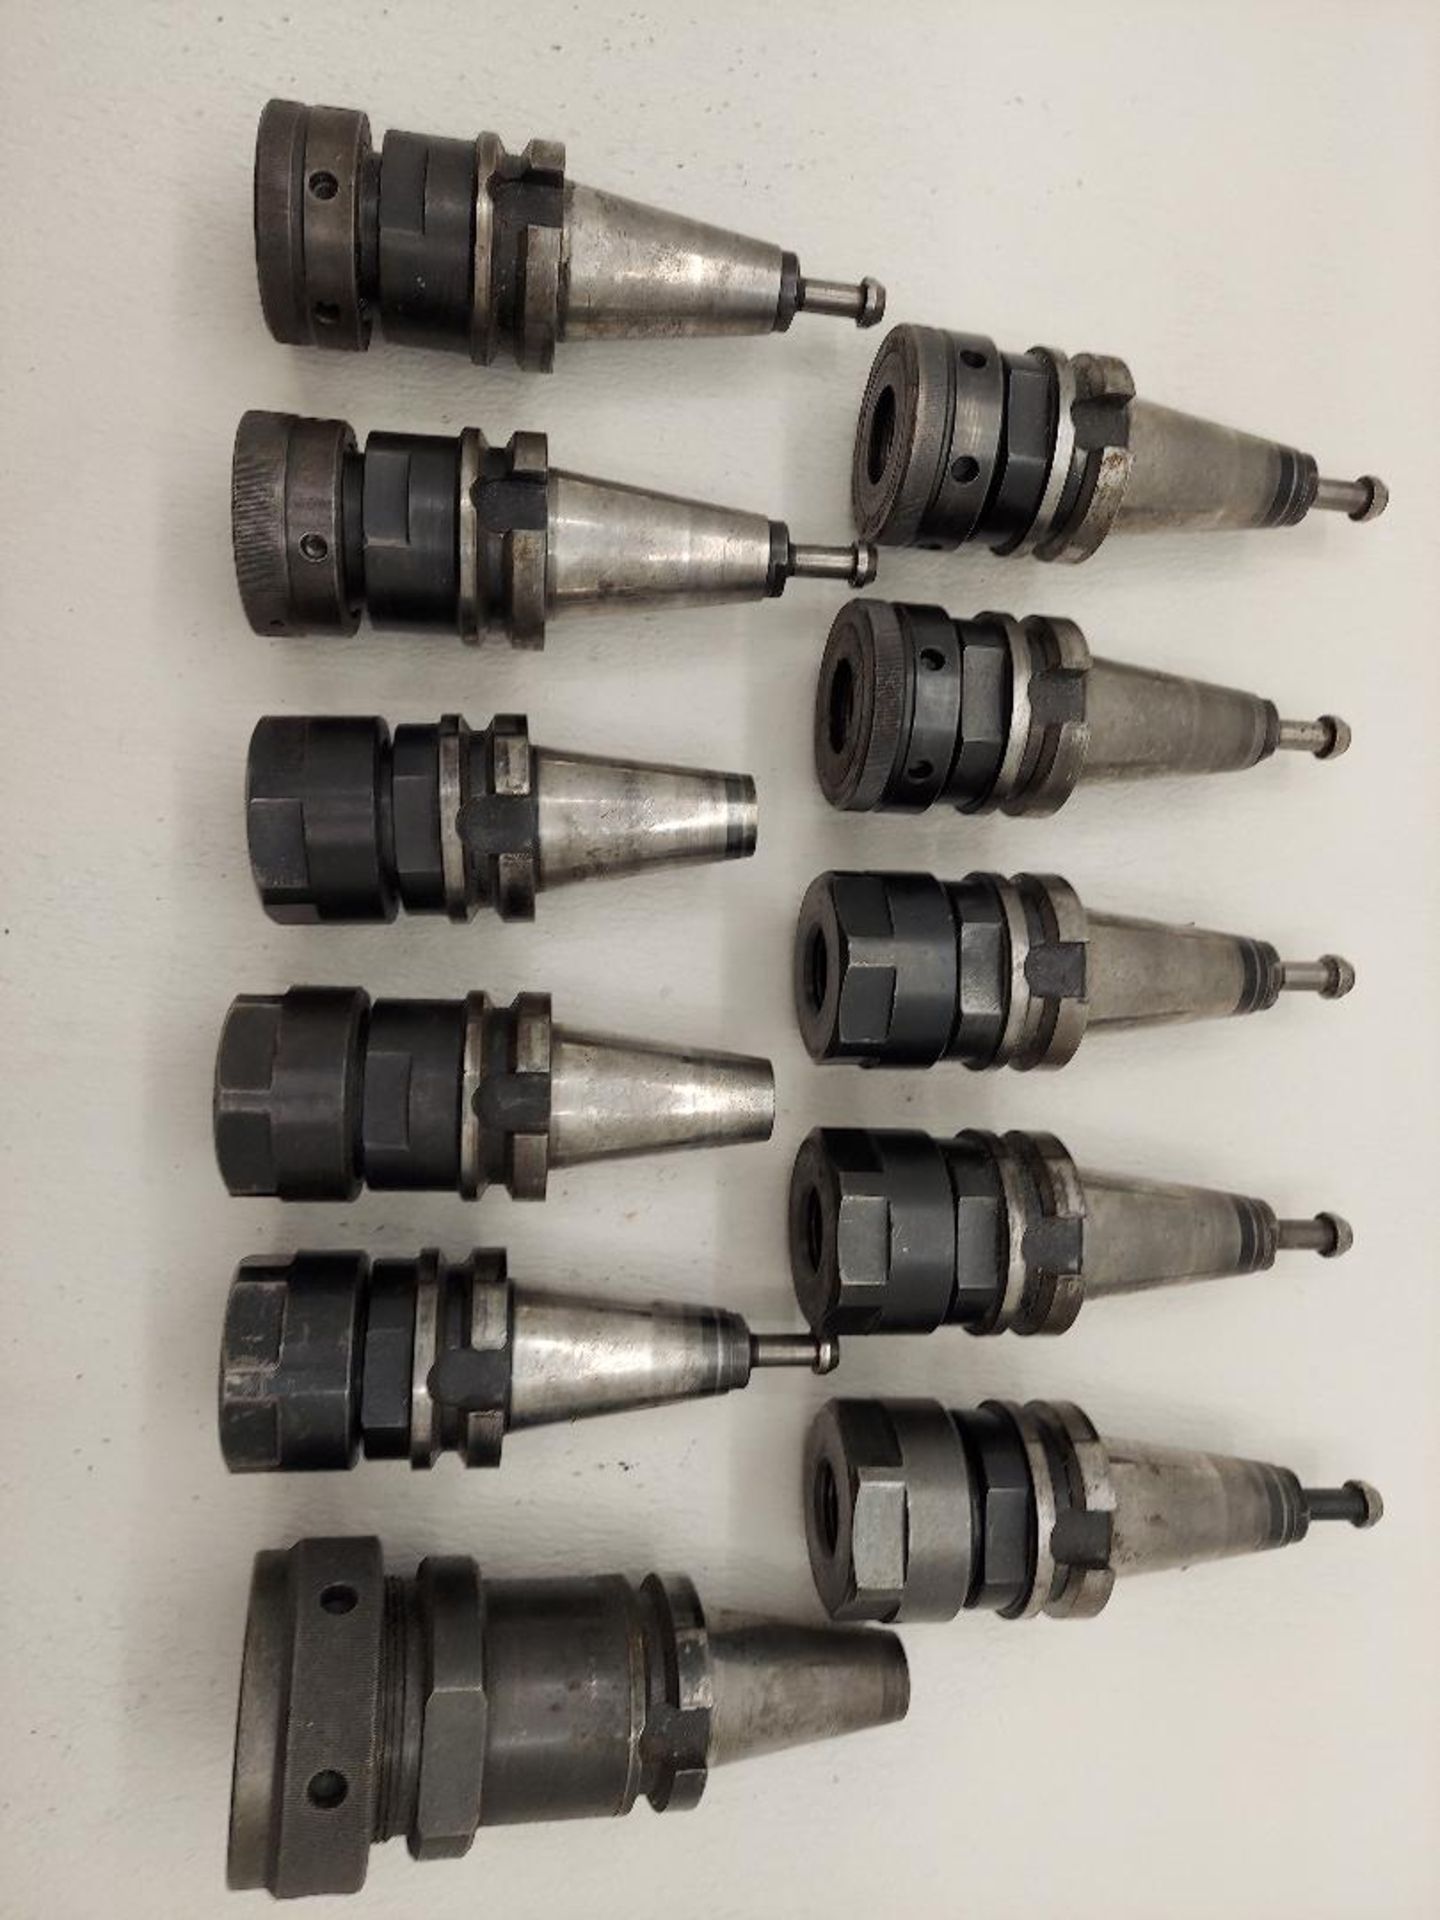 LOT OF (11) BT40 COLLET CHUCKS (Packing & Crating Charge $20.00) (Located at: The Tooling